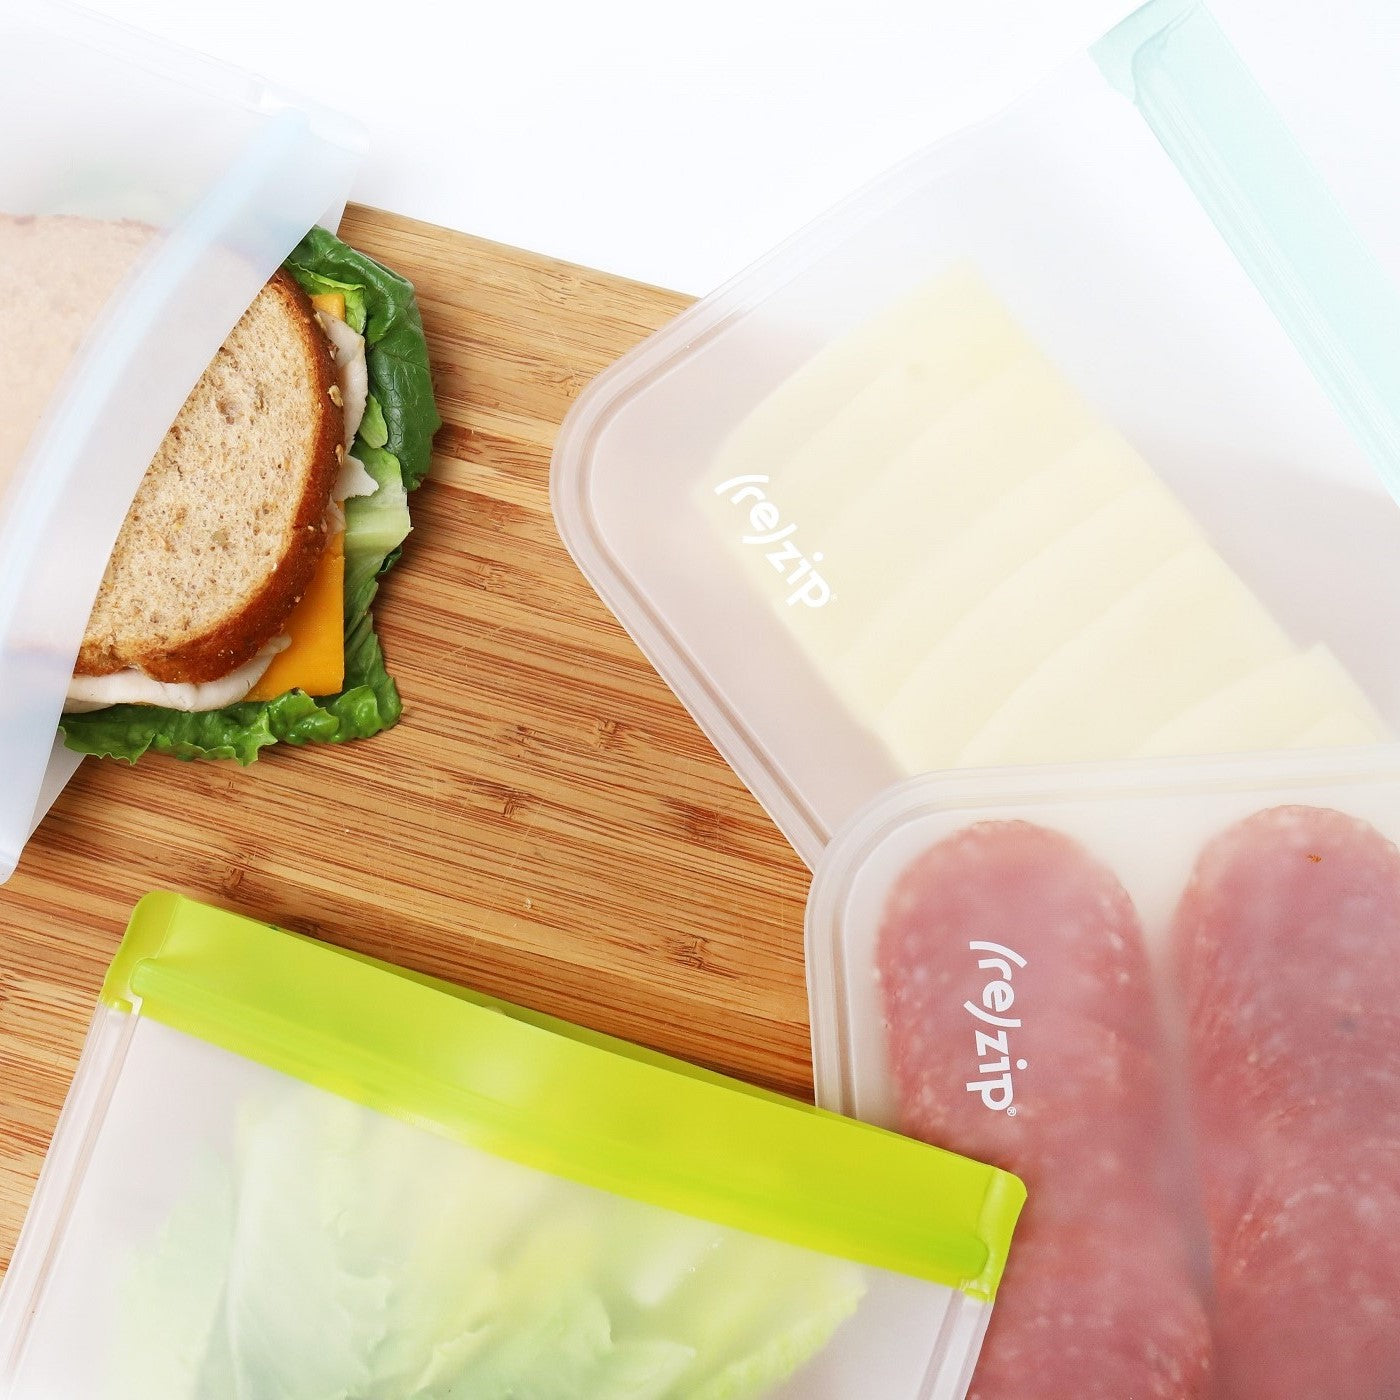 reusable half gallon deli bags are a refrigerator must have. Great for organizing deli meats and cheeses for that perfect sandwich